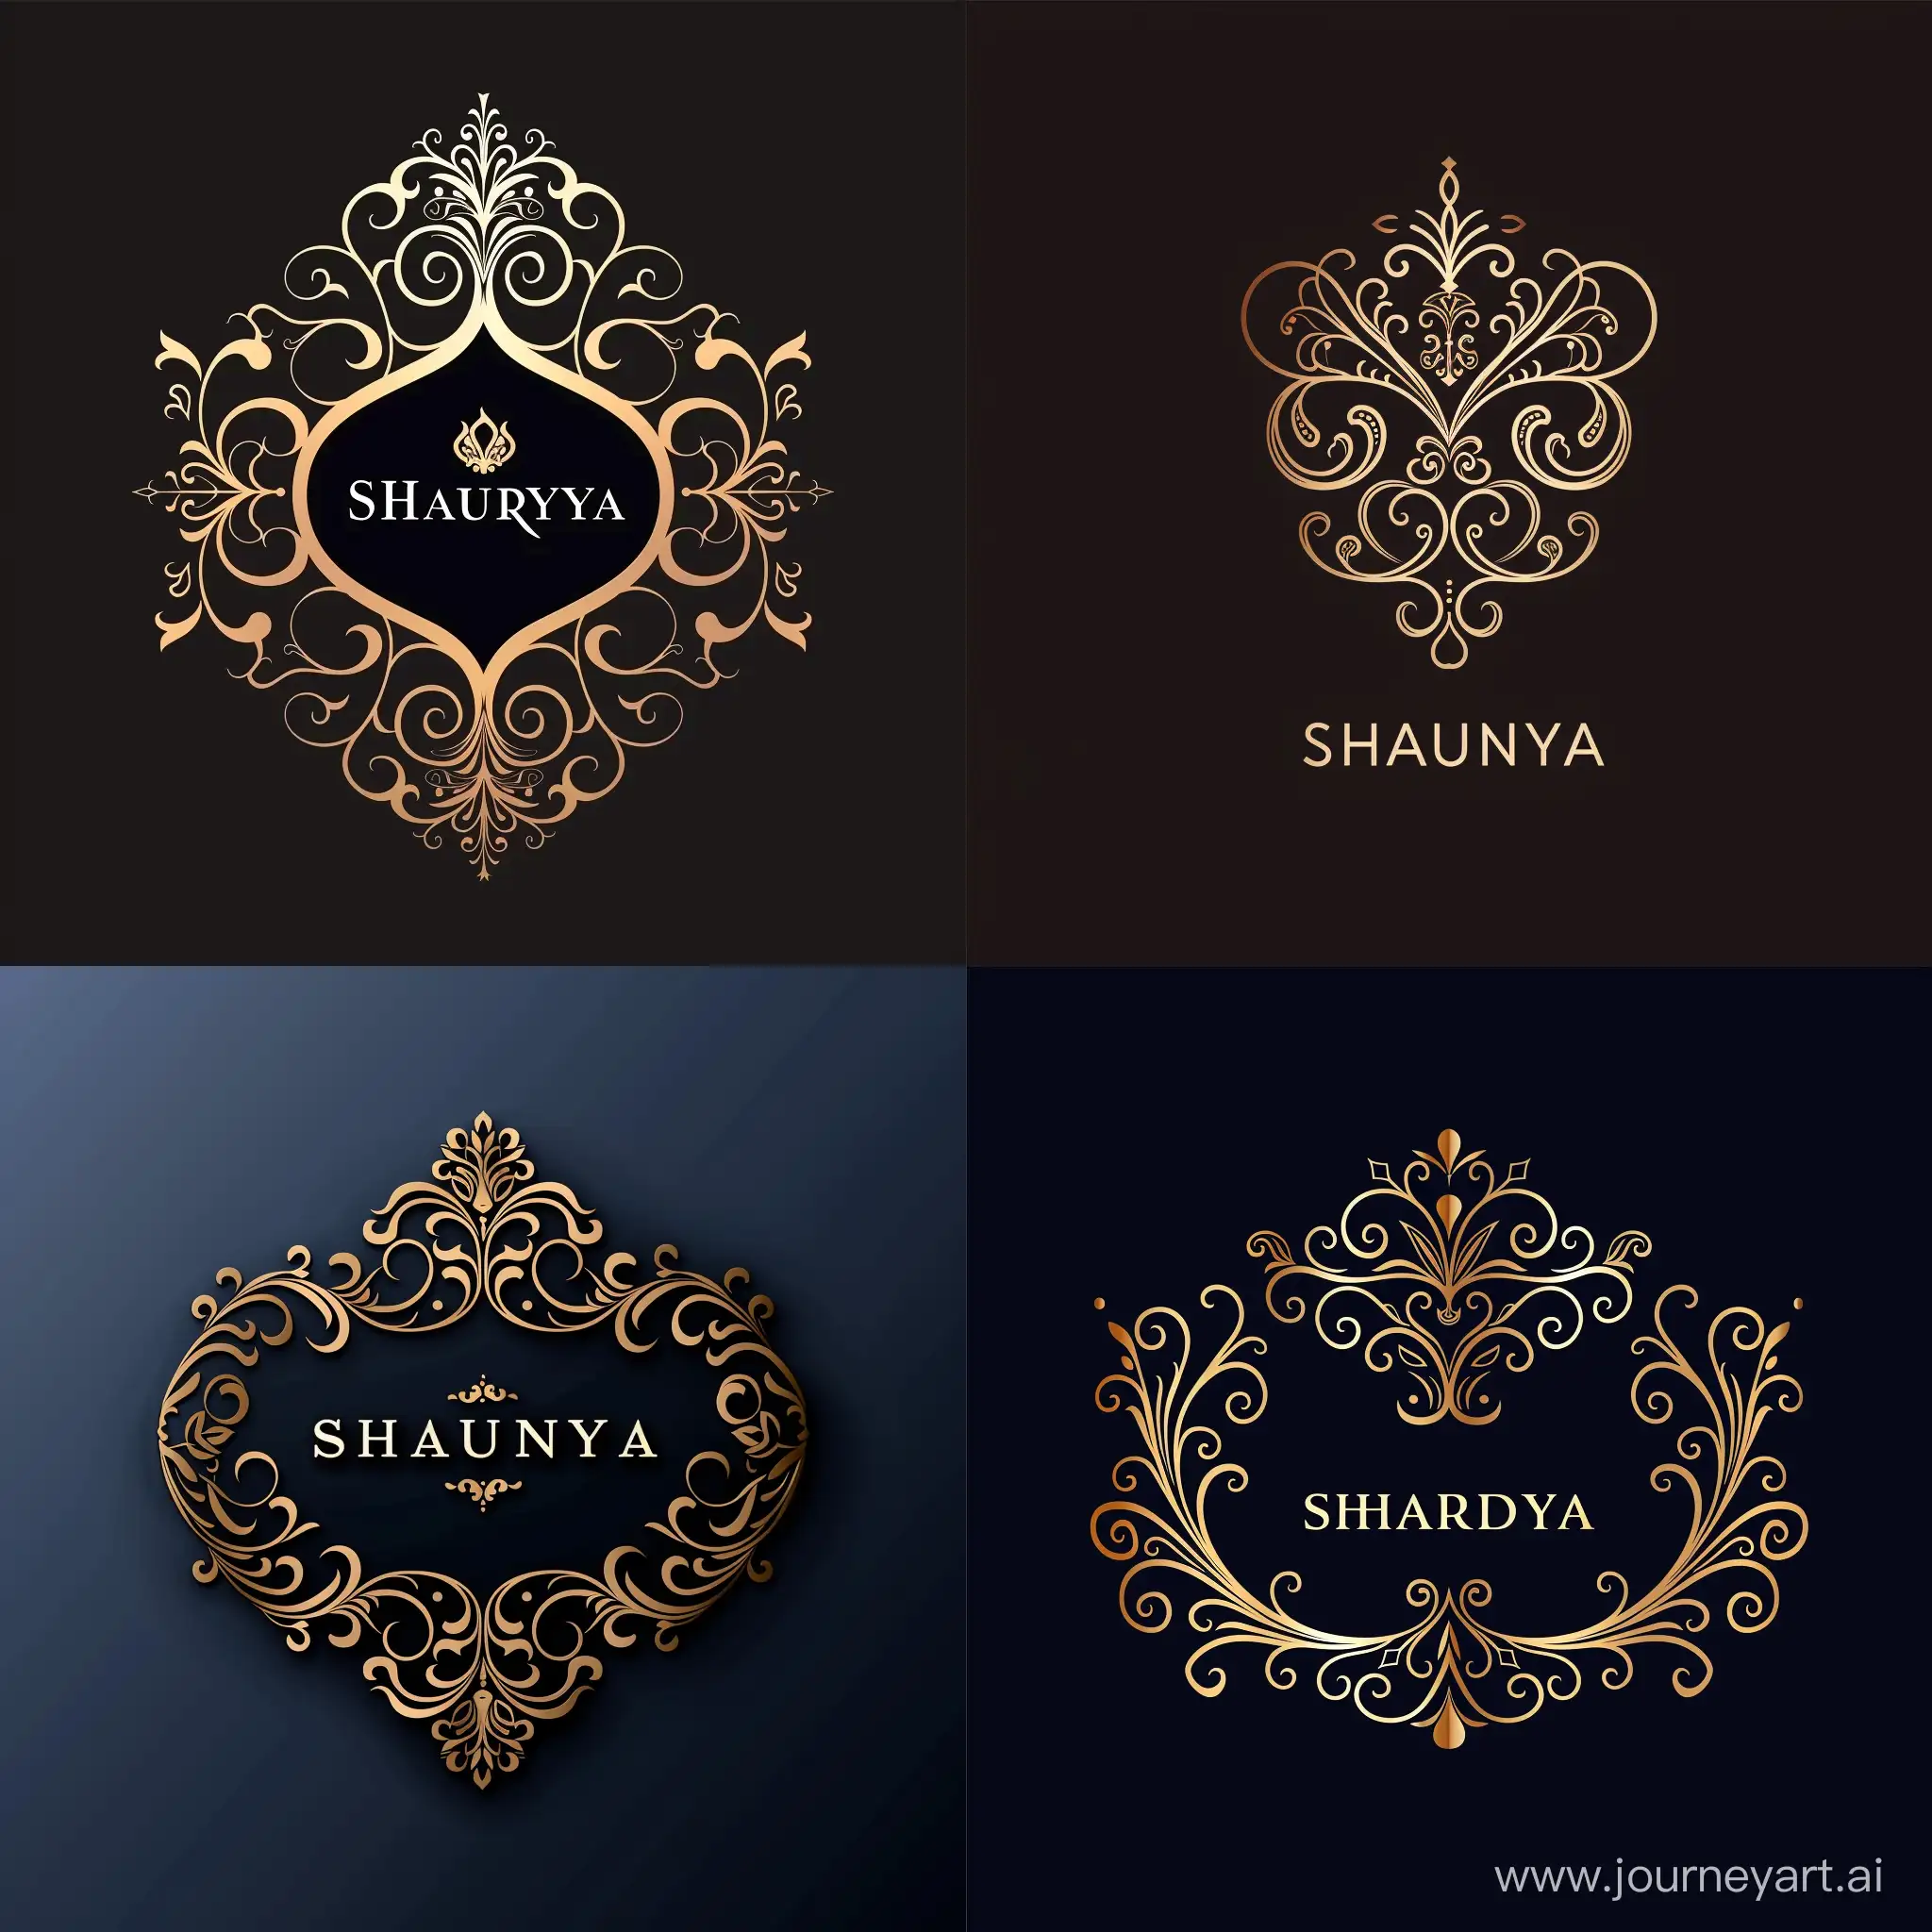 An elegant yet classy logo which includes the name Shaurya